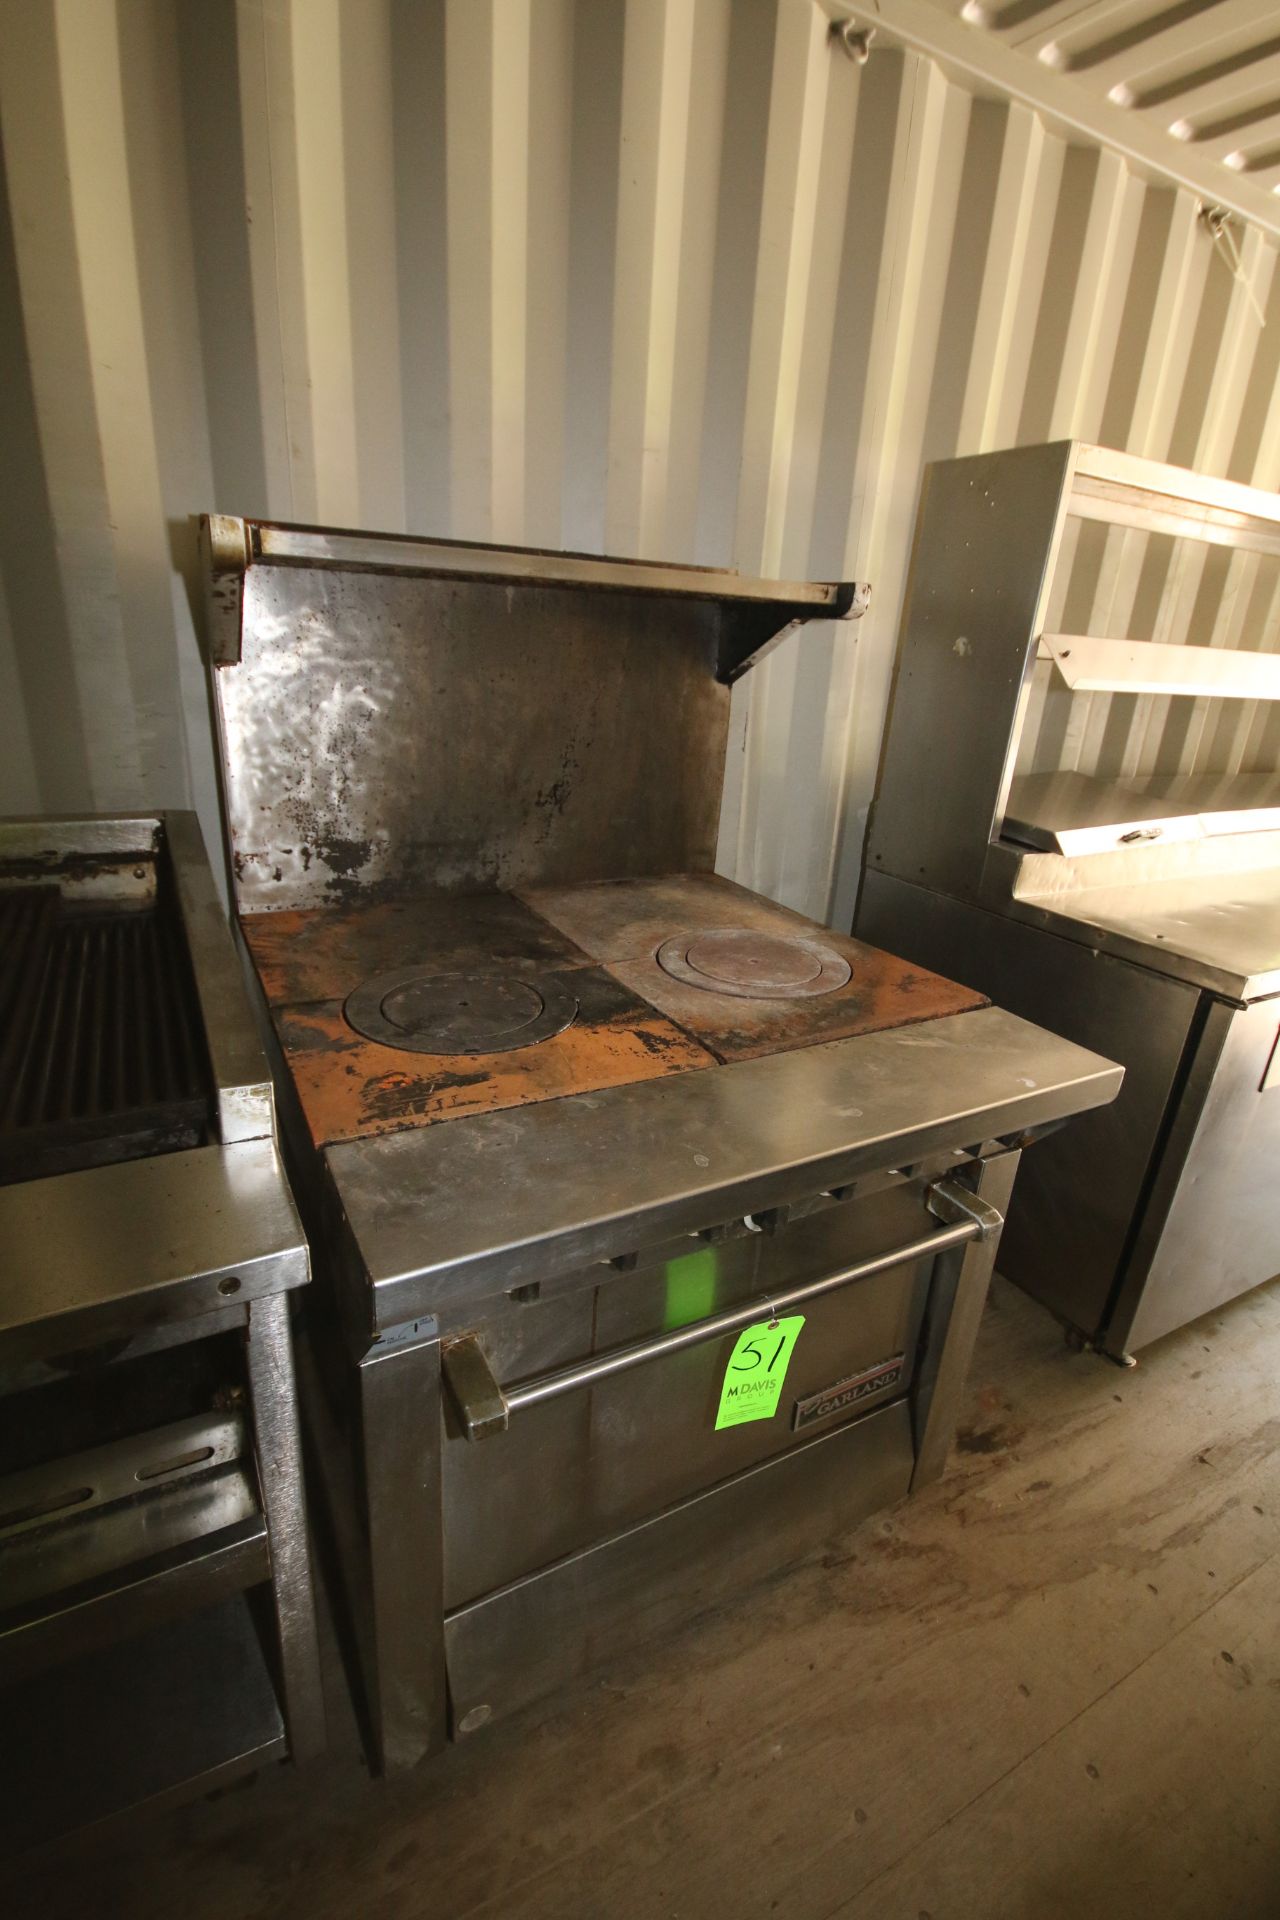 Garland Double-Burner Stove, with Bottom Oven and Racks, Natural Gas Operated - Image 2 of 3